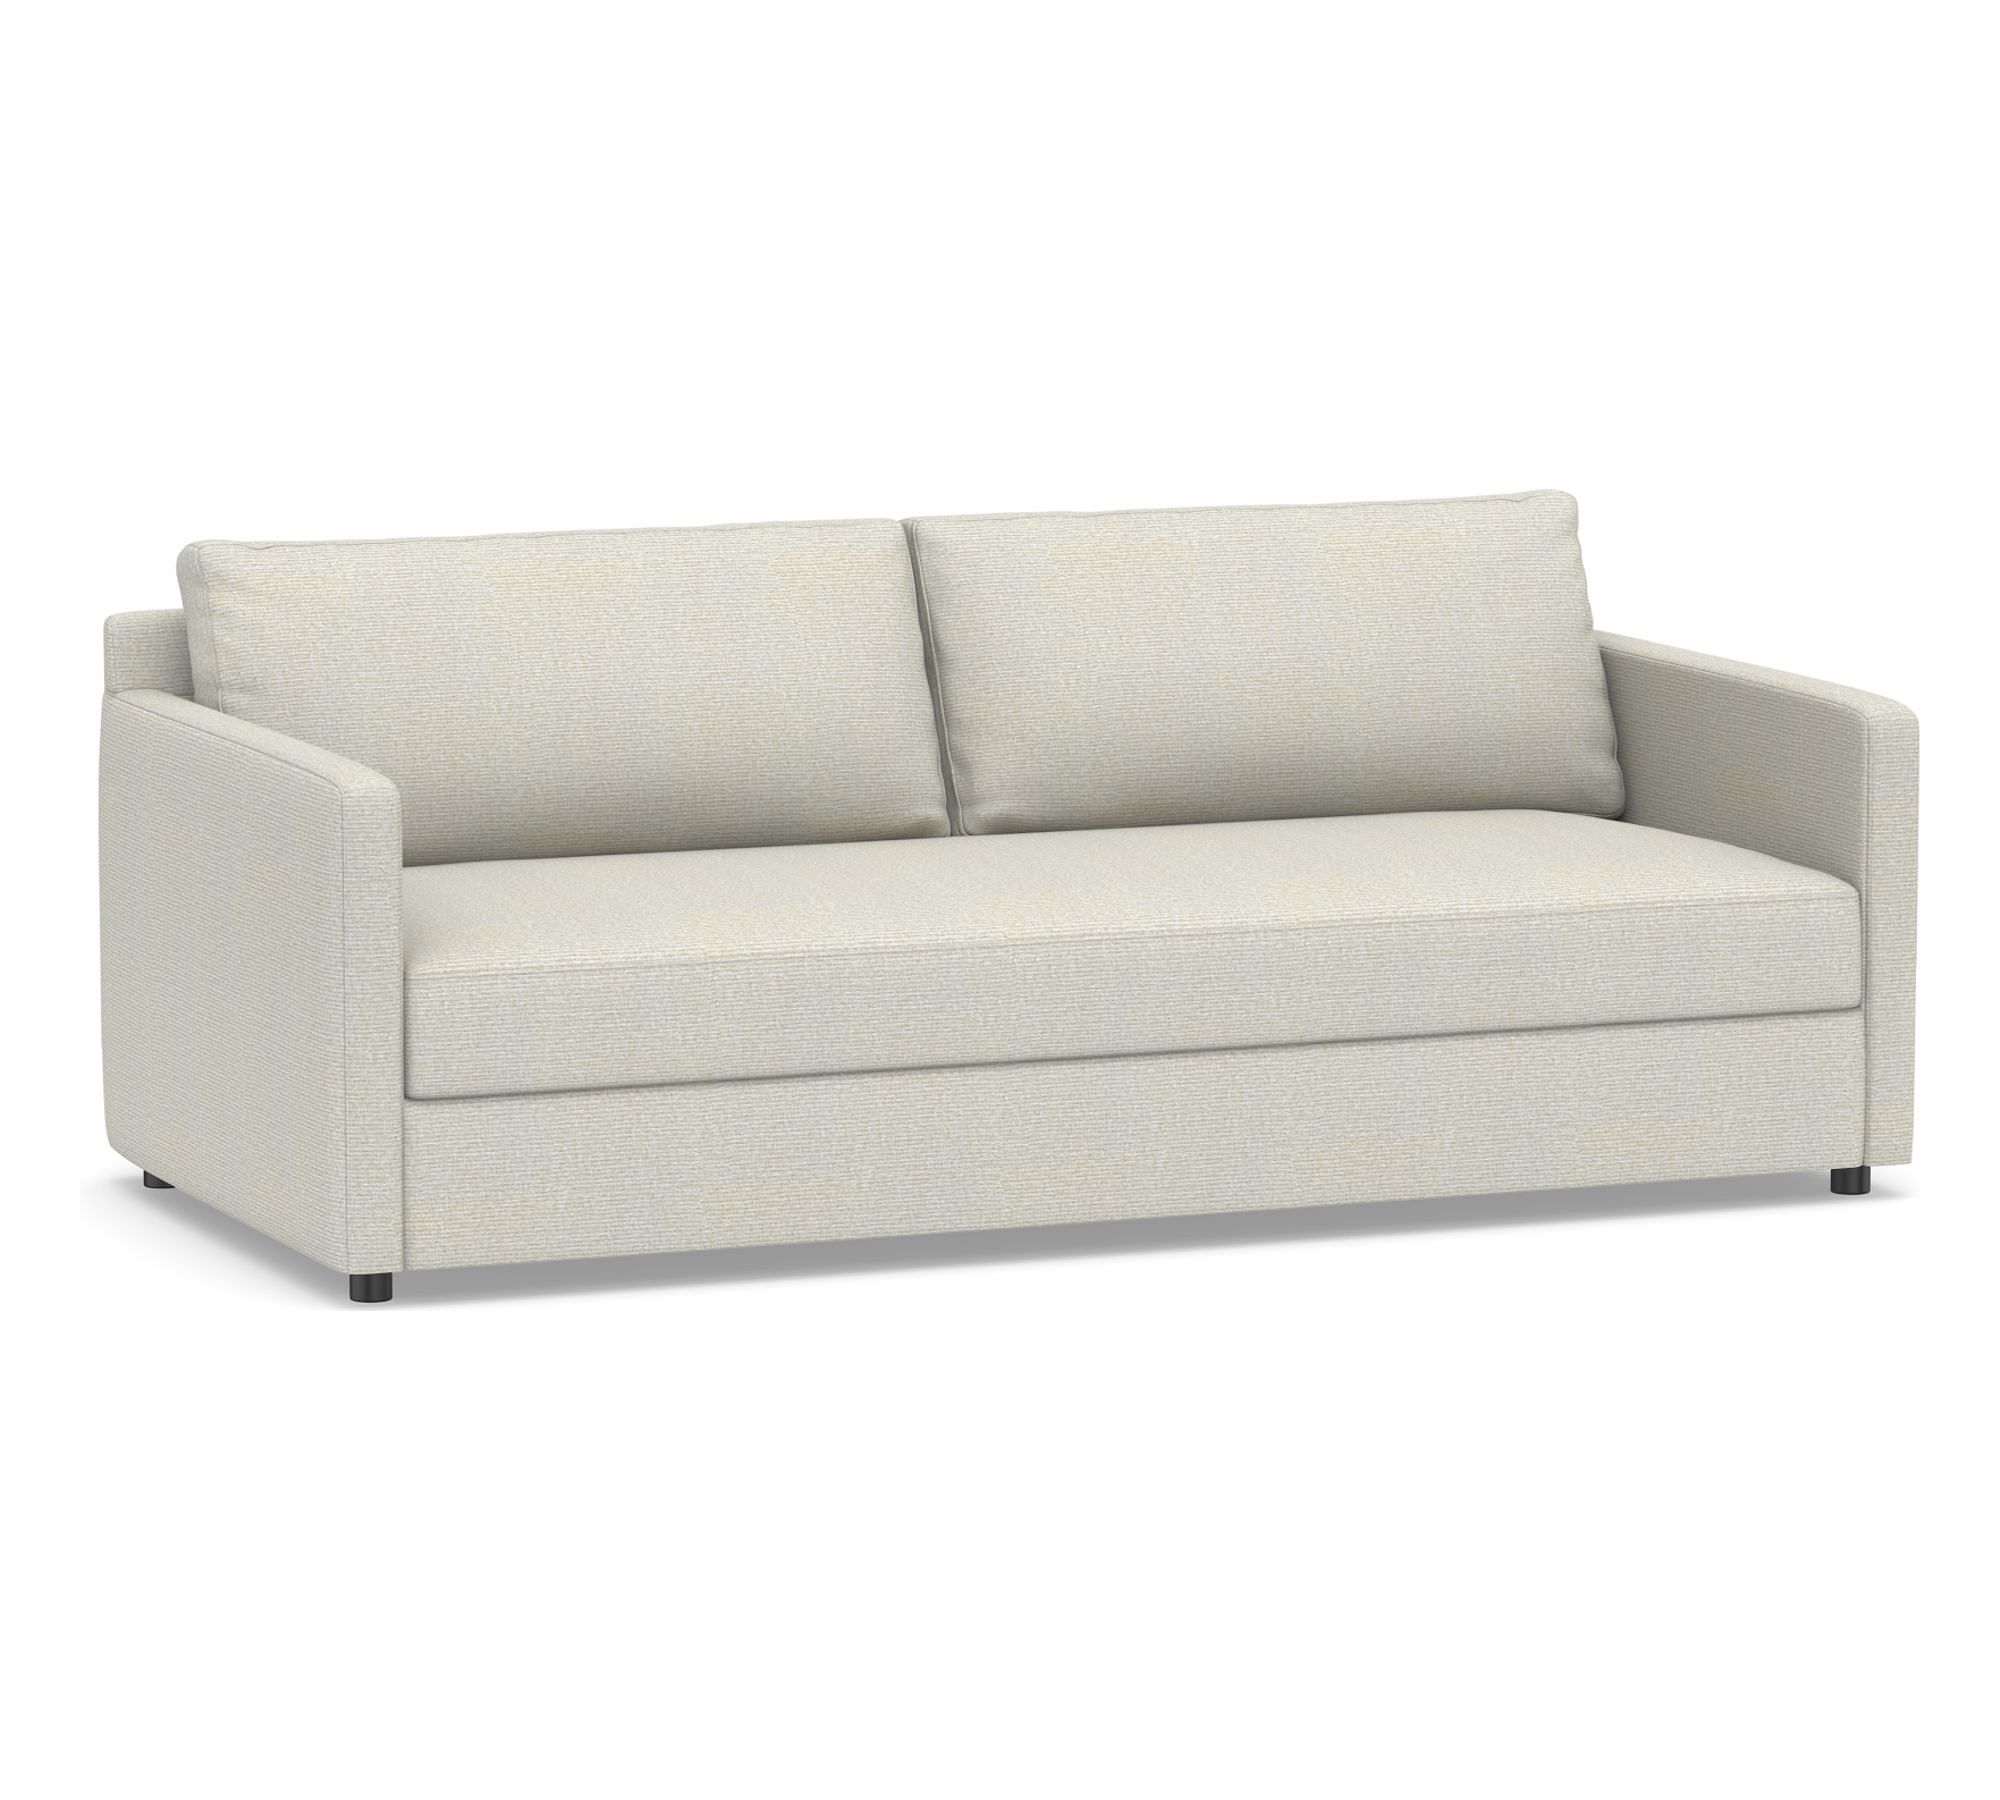 Pacifica Trundle Sleeper Sofa (82")